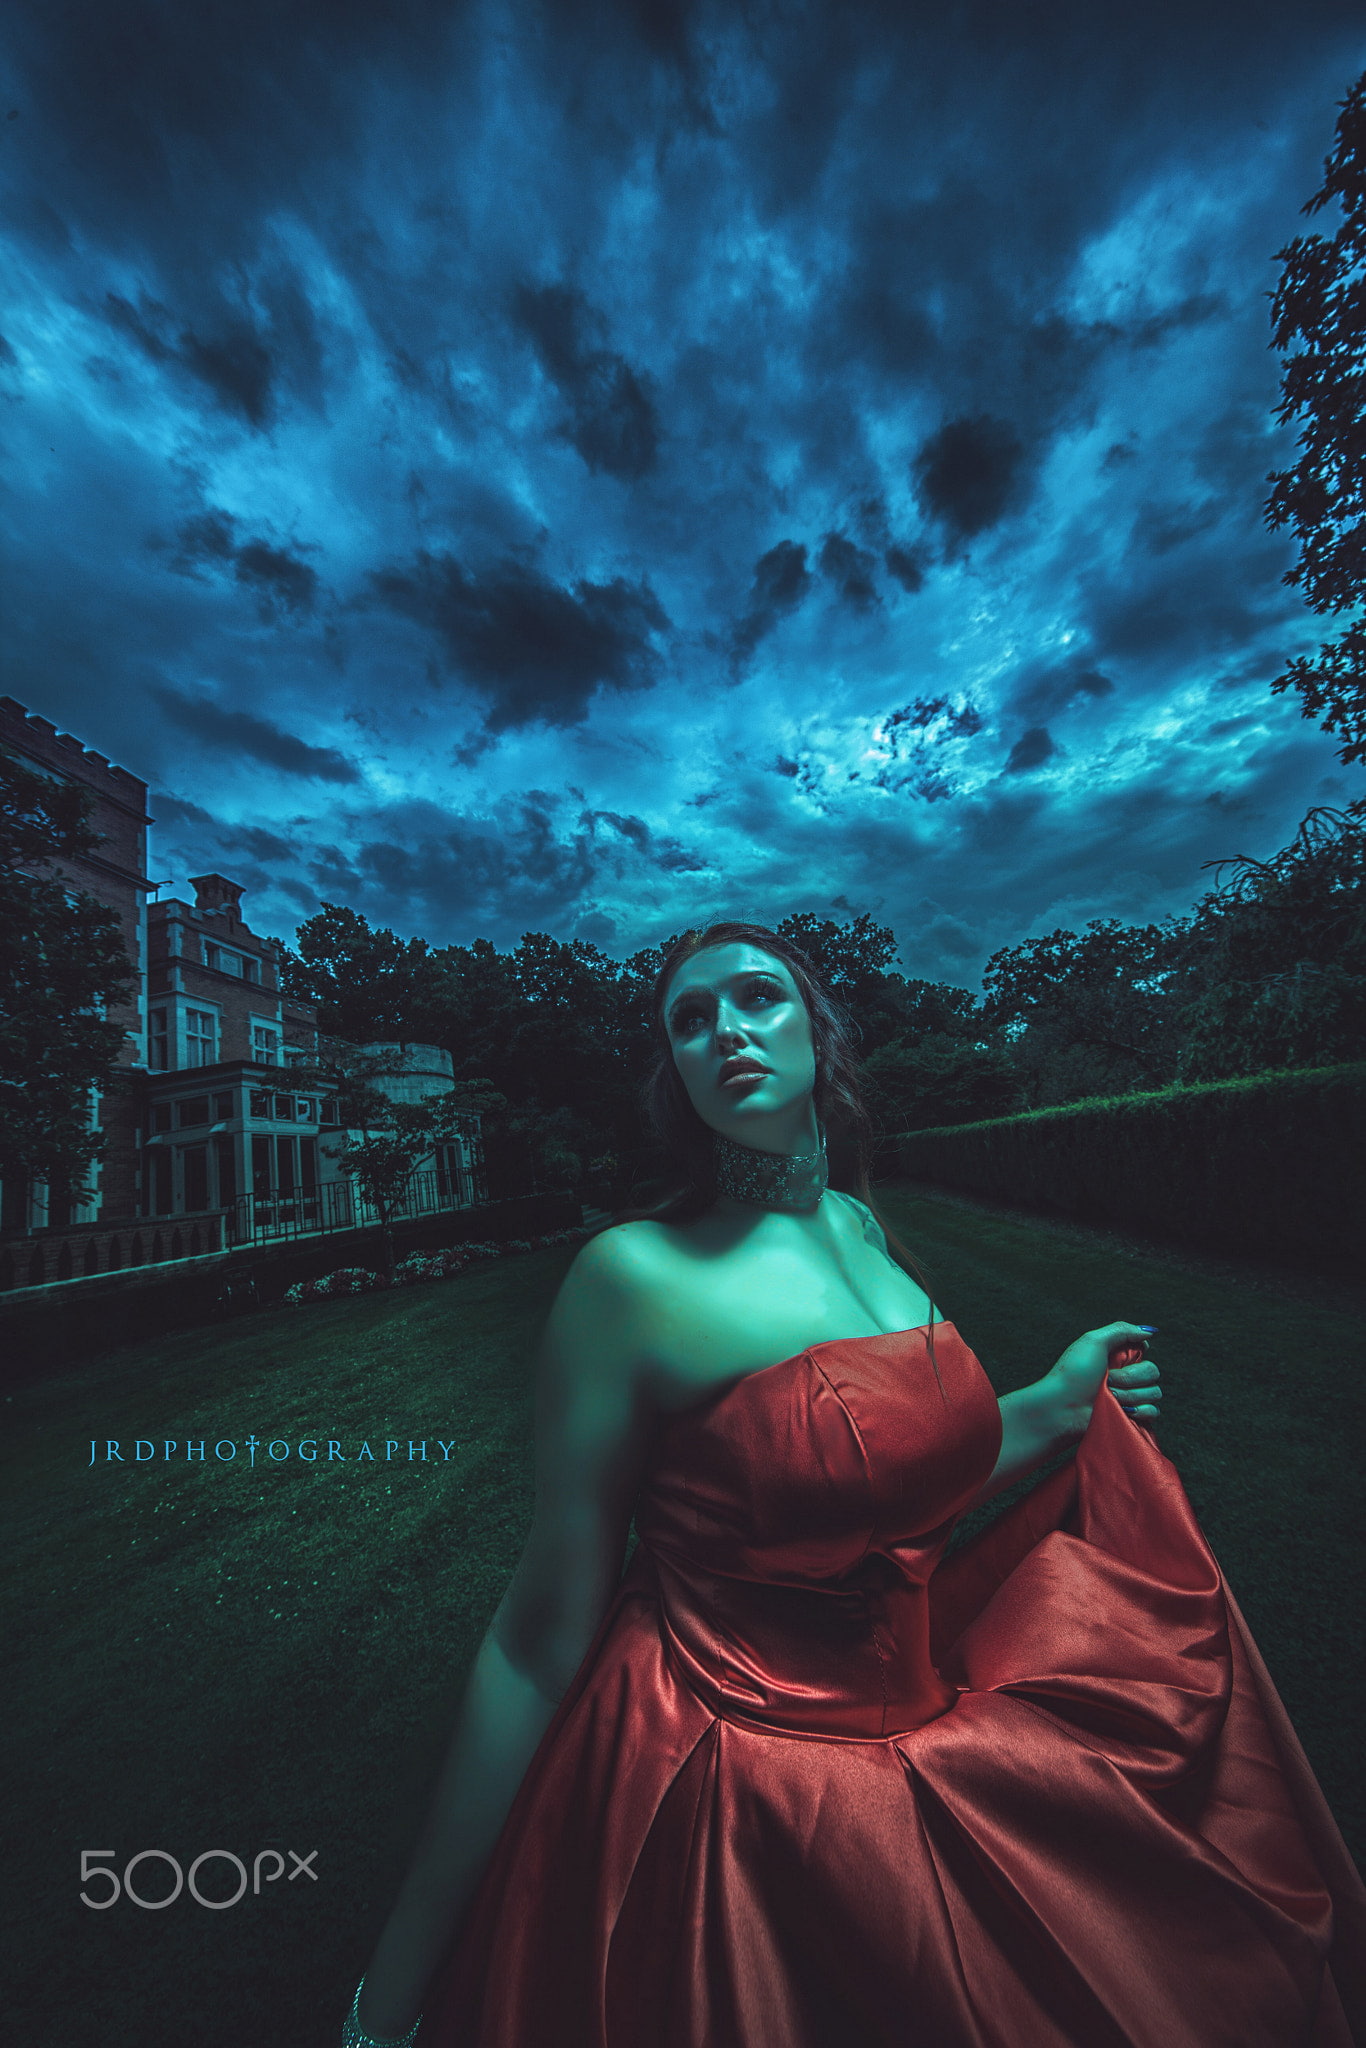 JRD Photography, spooky, night, dark, sky, women, adult, one person